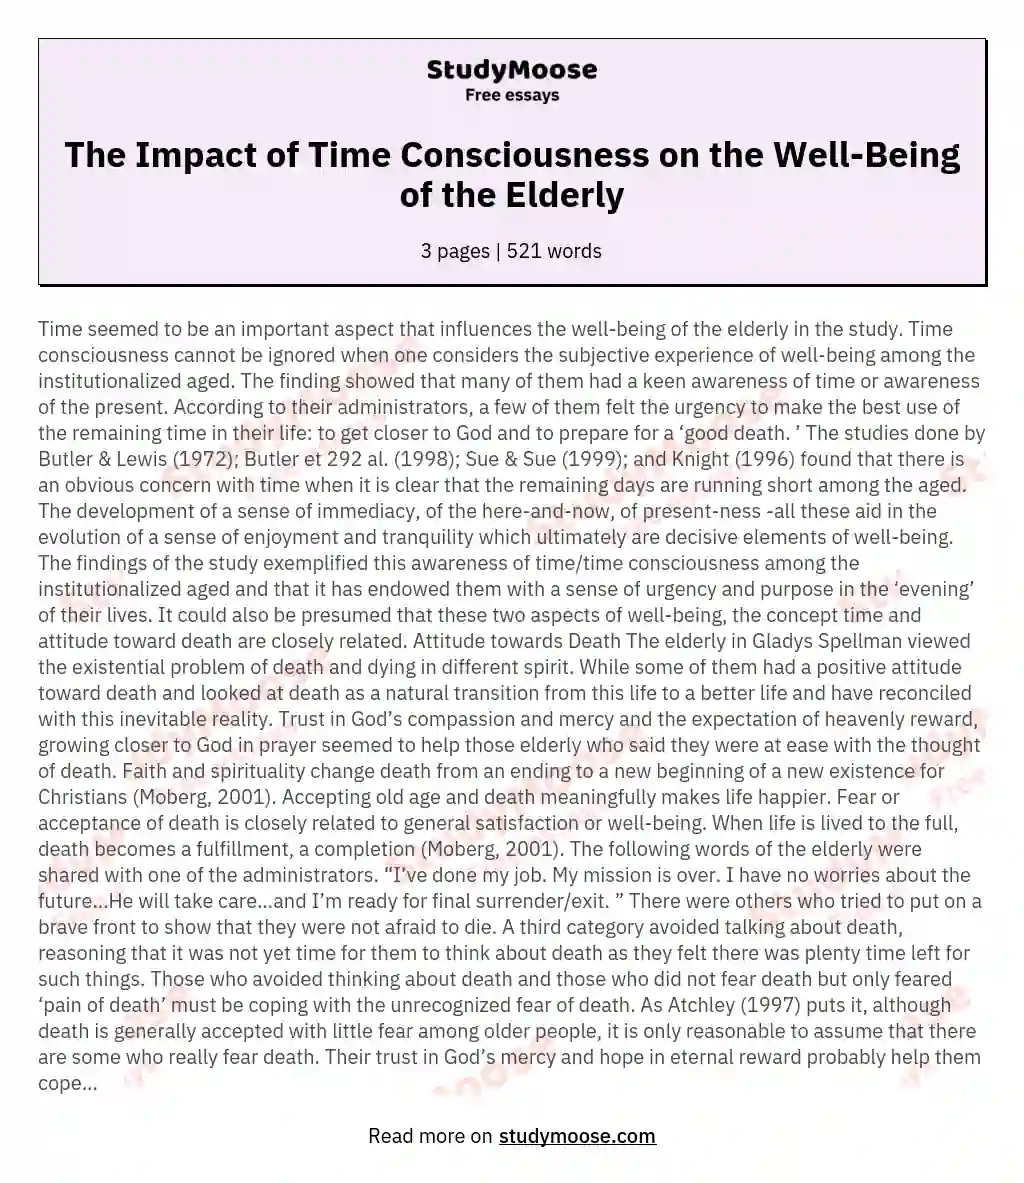 The Impact of Time Consciousness on the Well-Being of the Elderly essay